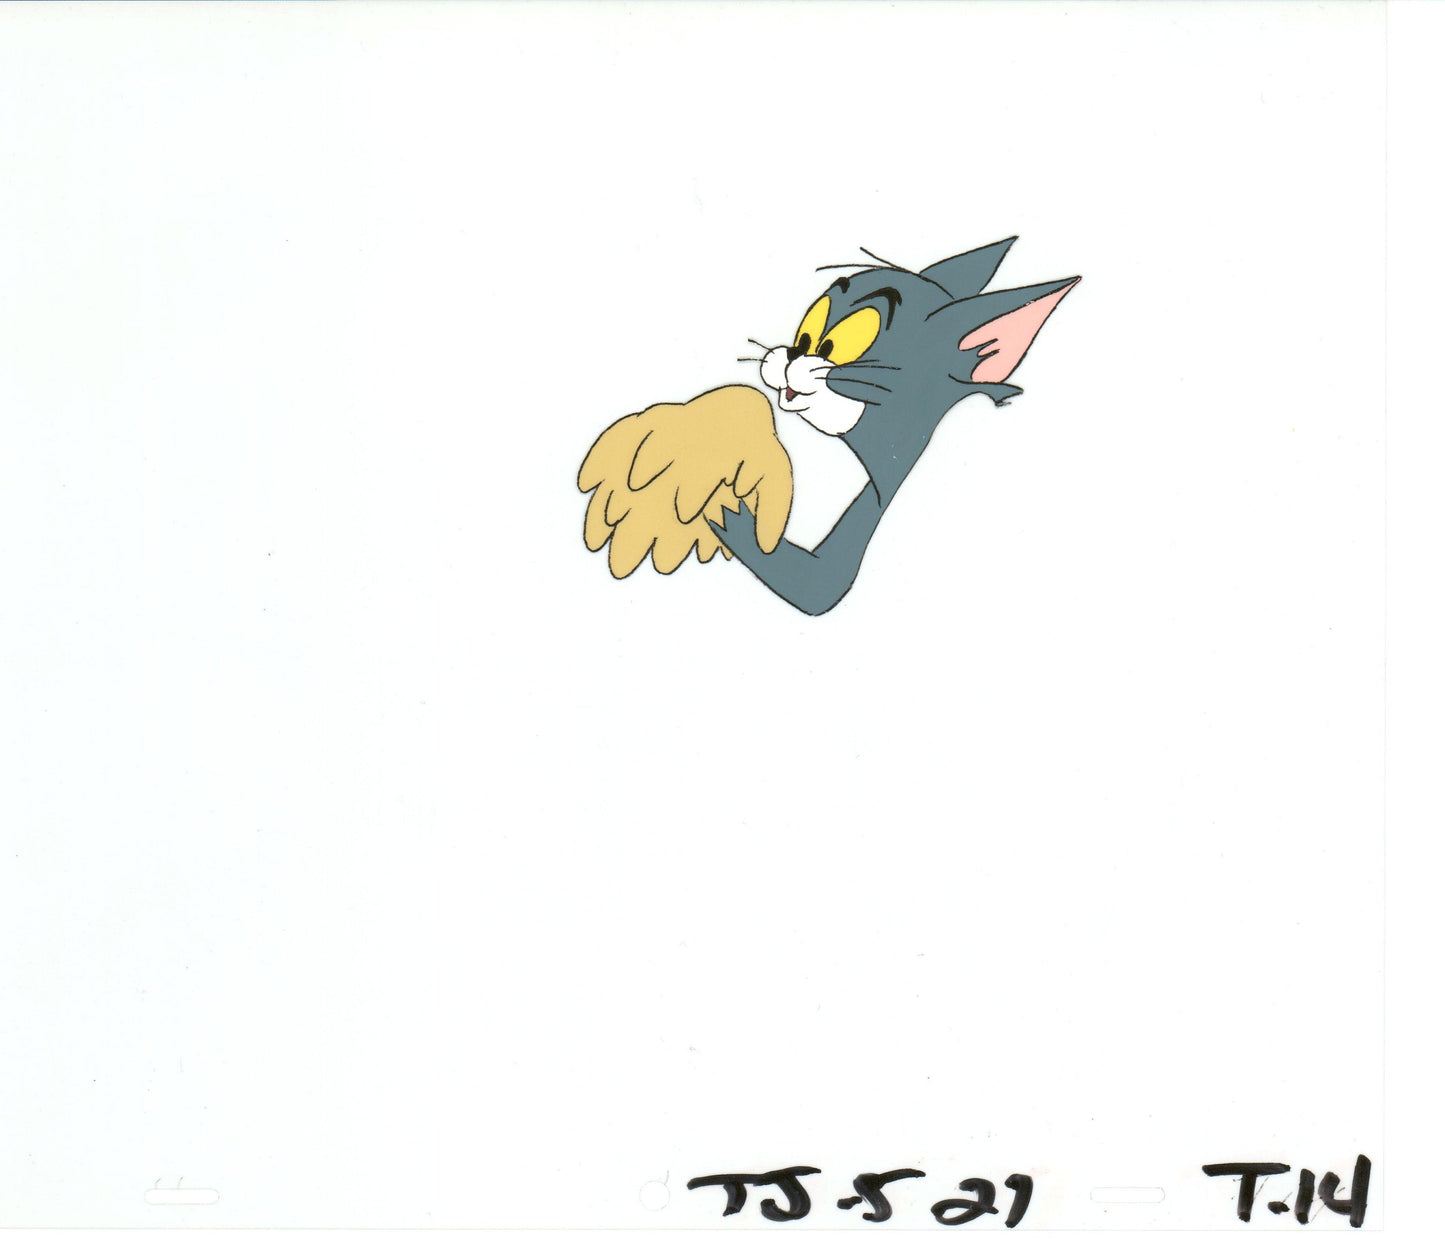 Tom & Jerry Original Production Animation Cel from Filmation 1980-82 b4341